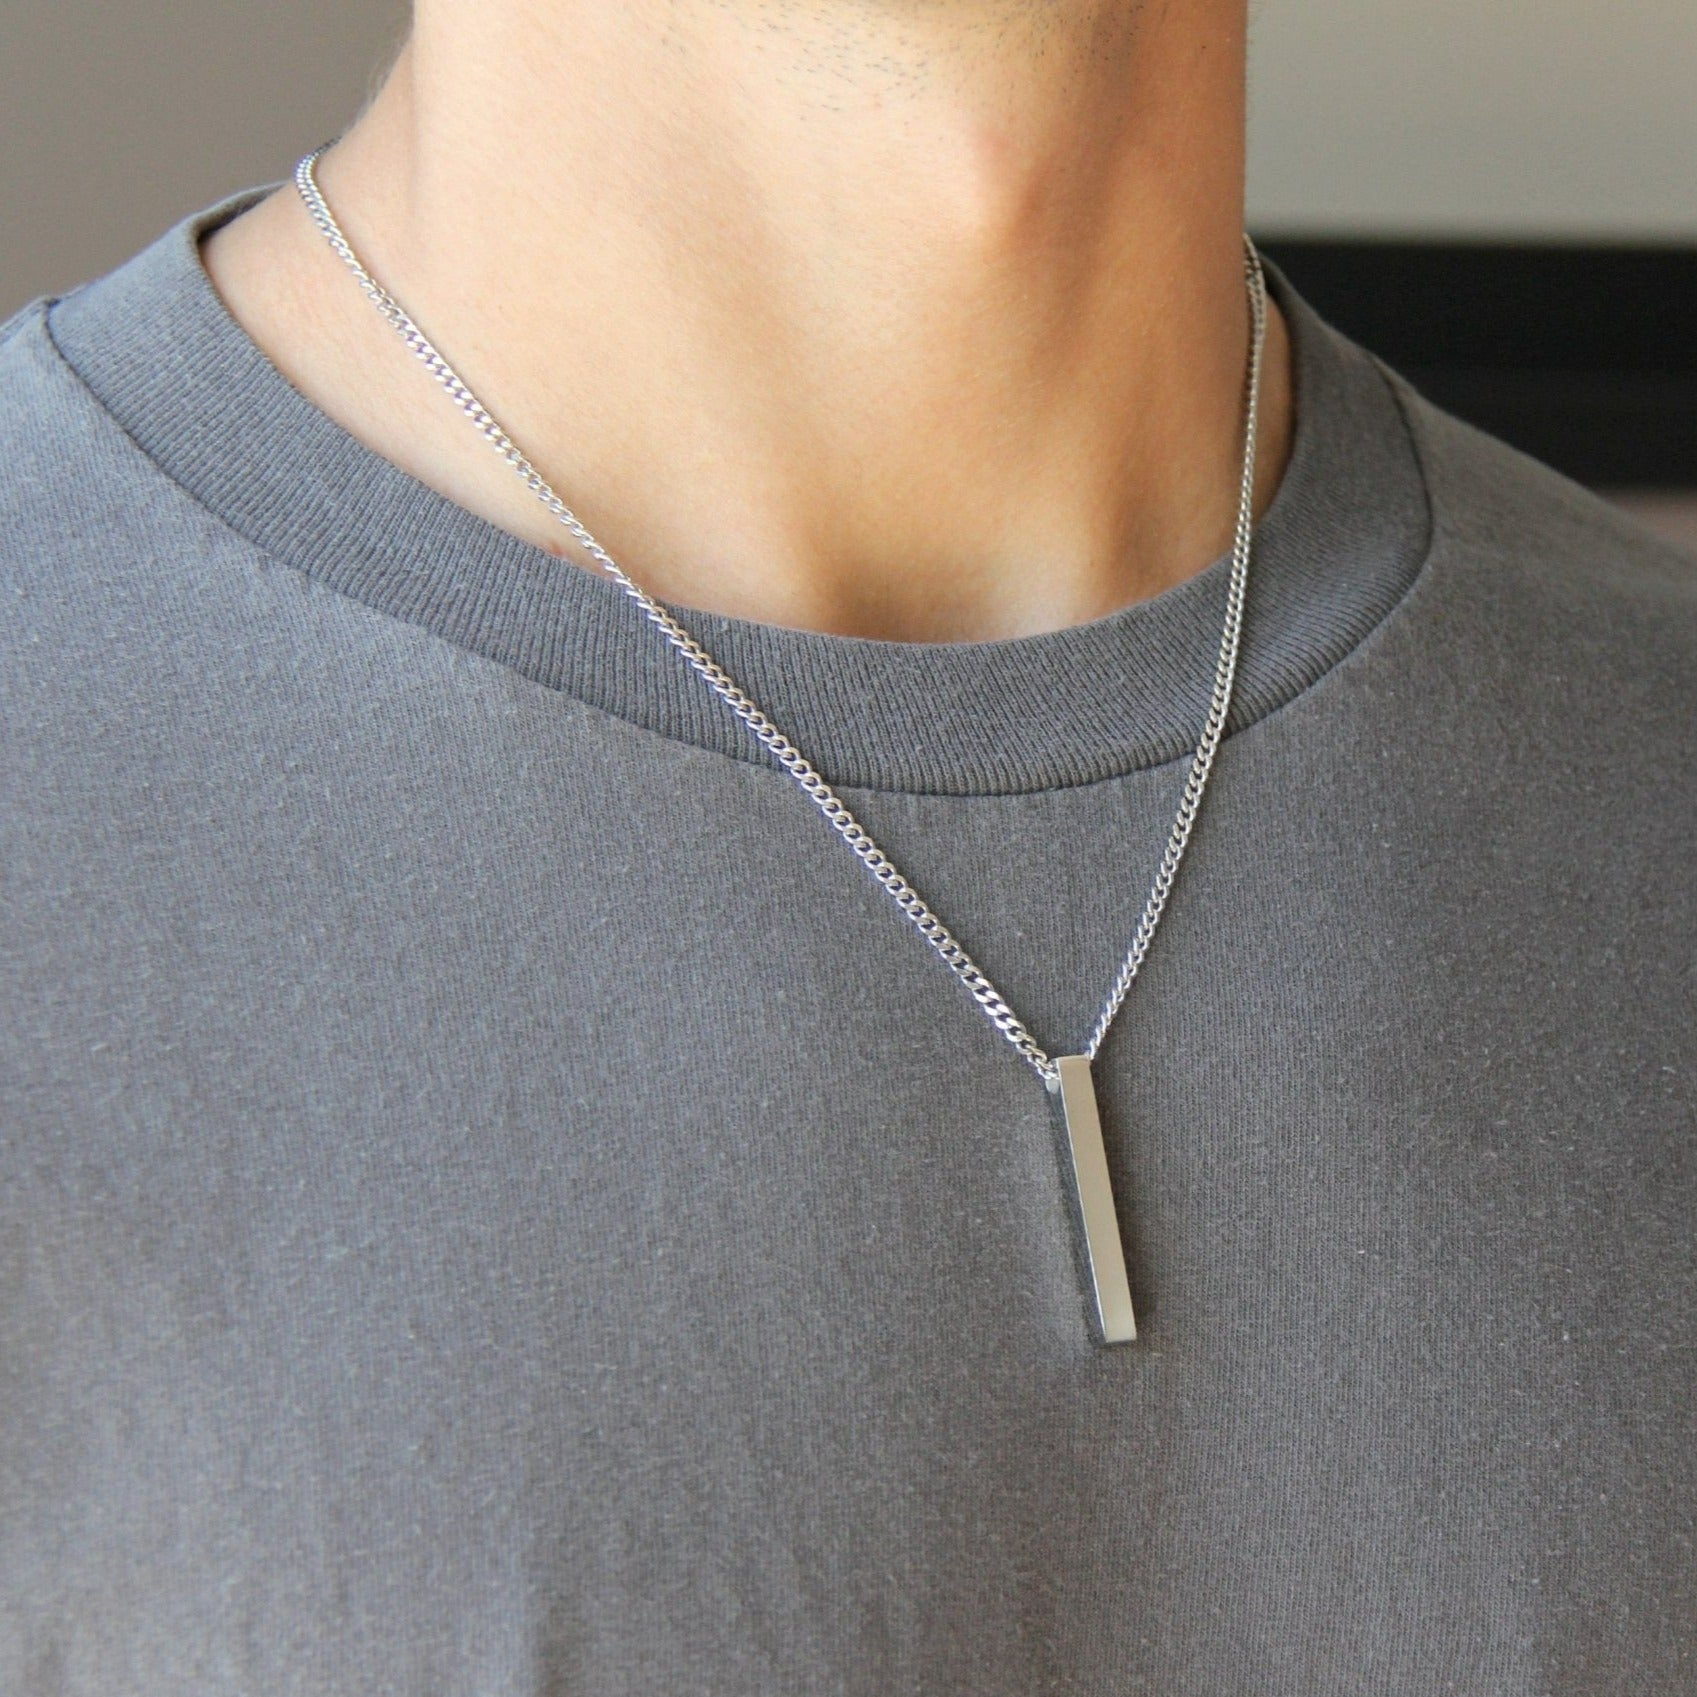 Silver Long Bar Pendant Necklace 3mm Curb Chain For Men